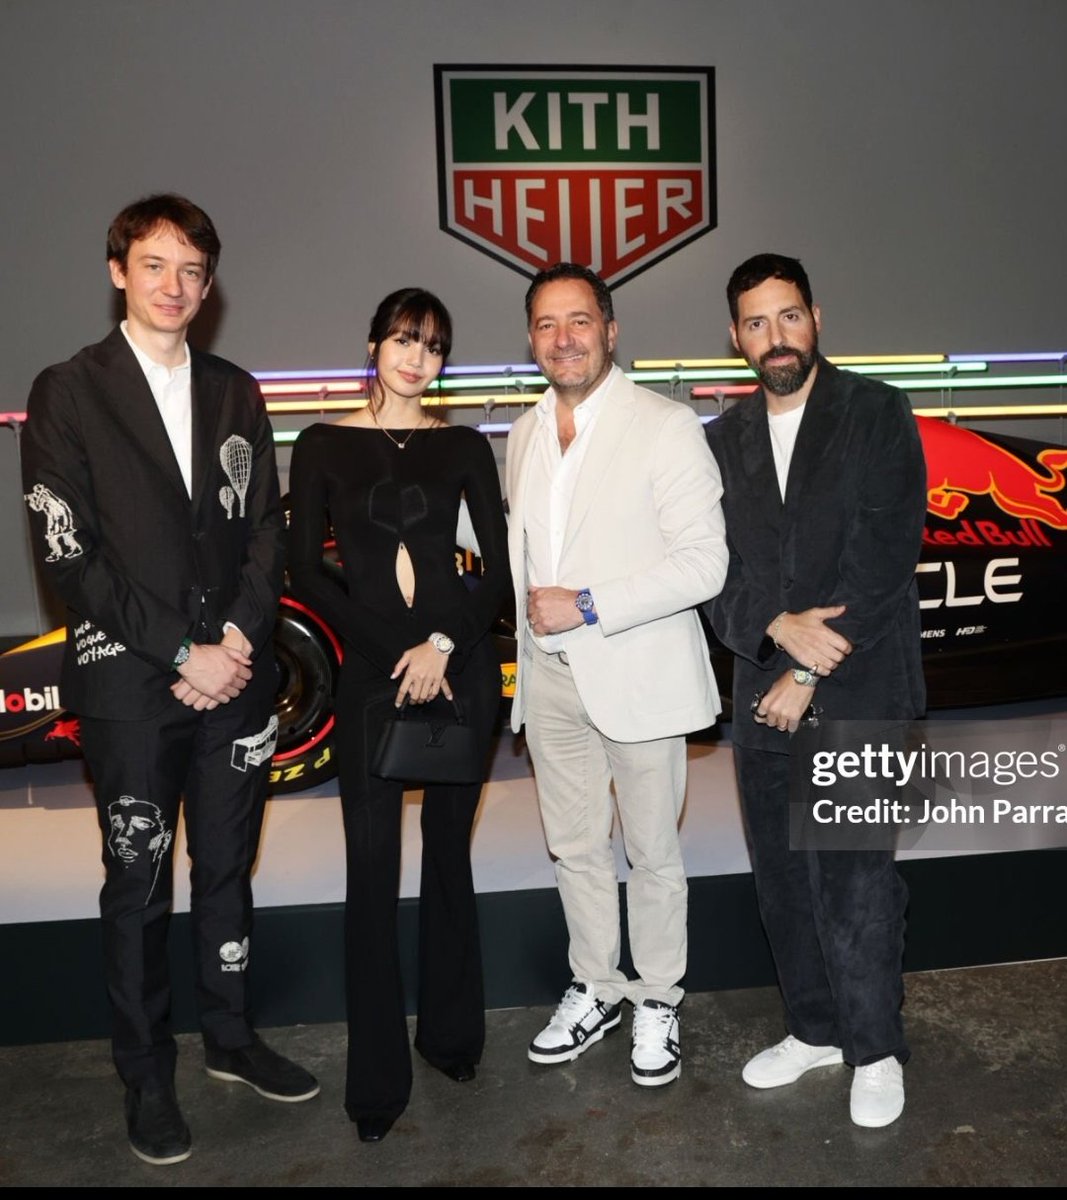 CEO TAGHEUER
CEO LLOUD
CEO KITH